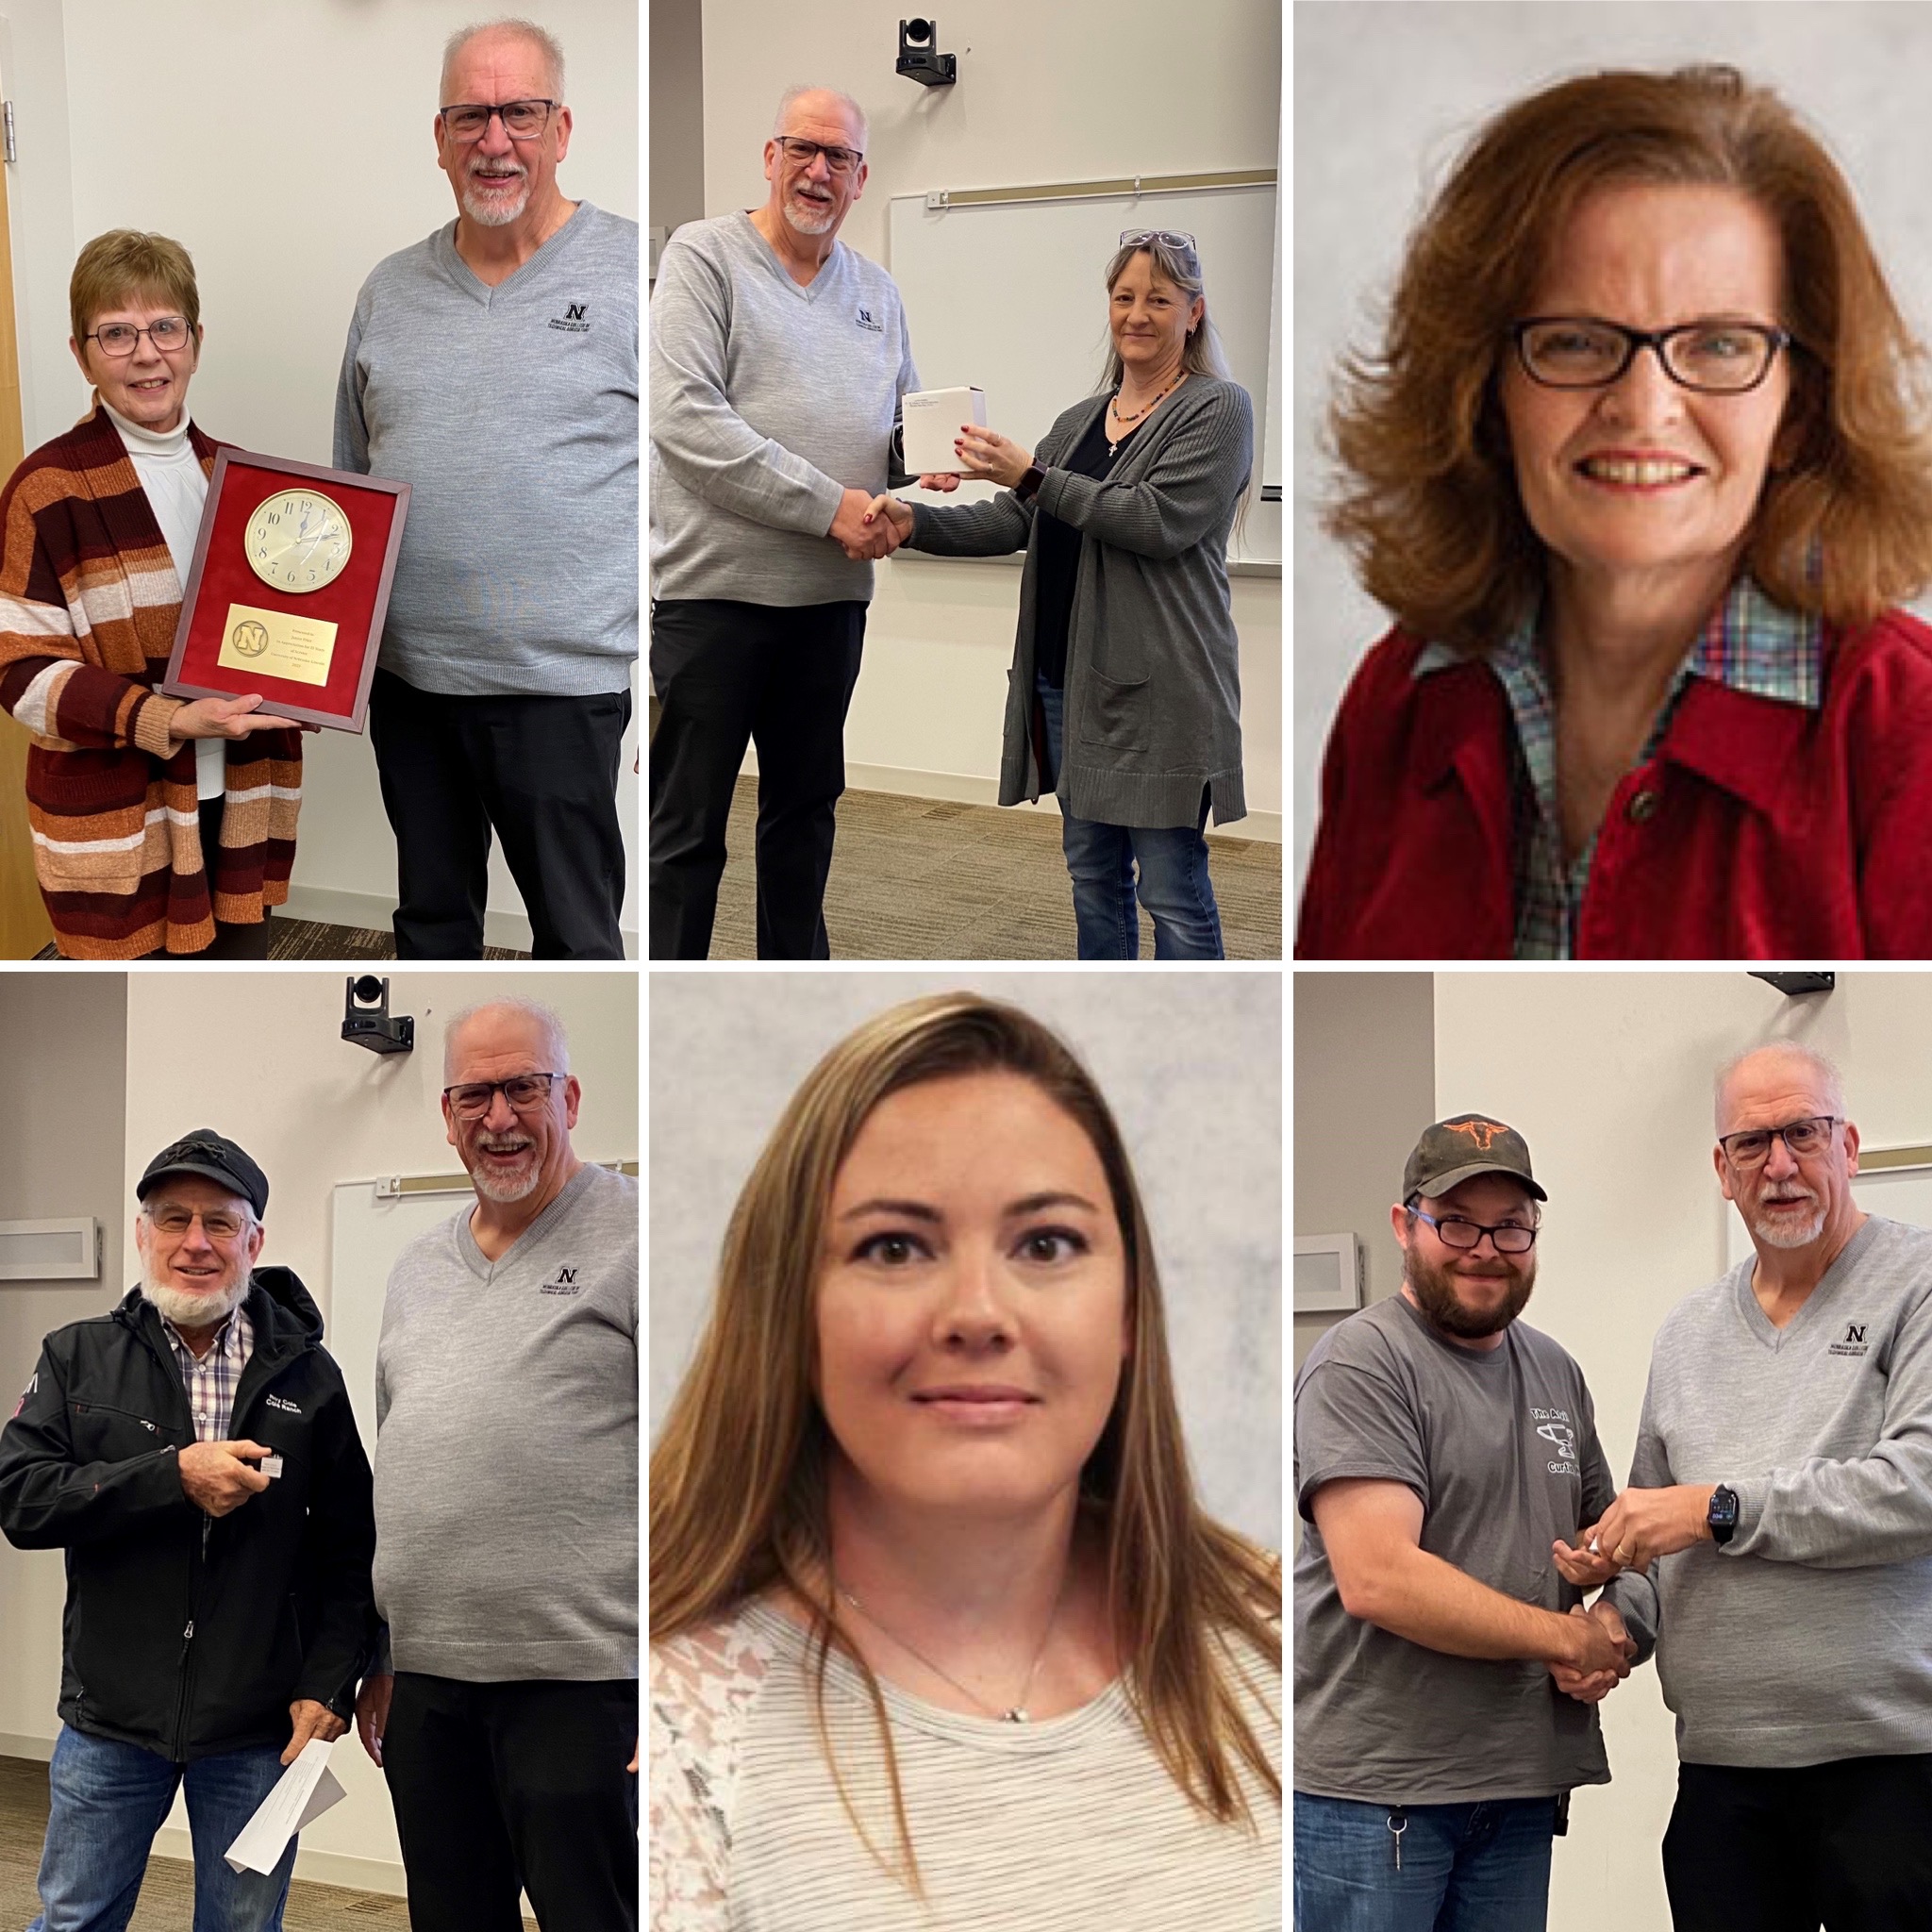 NCTA employees recognized for years of service (from top L - R): Jan Price, Laura Romeo, Jan Gilbert, Roy Cole, Randi Houghtelling, and Anthony Gardner.